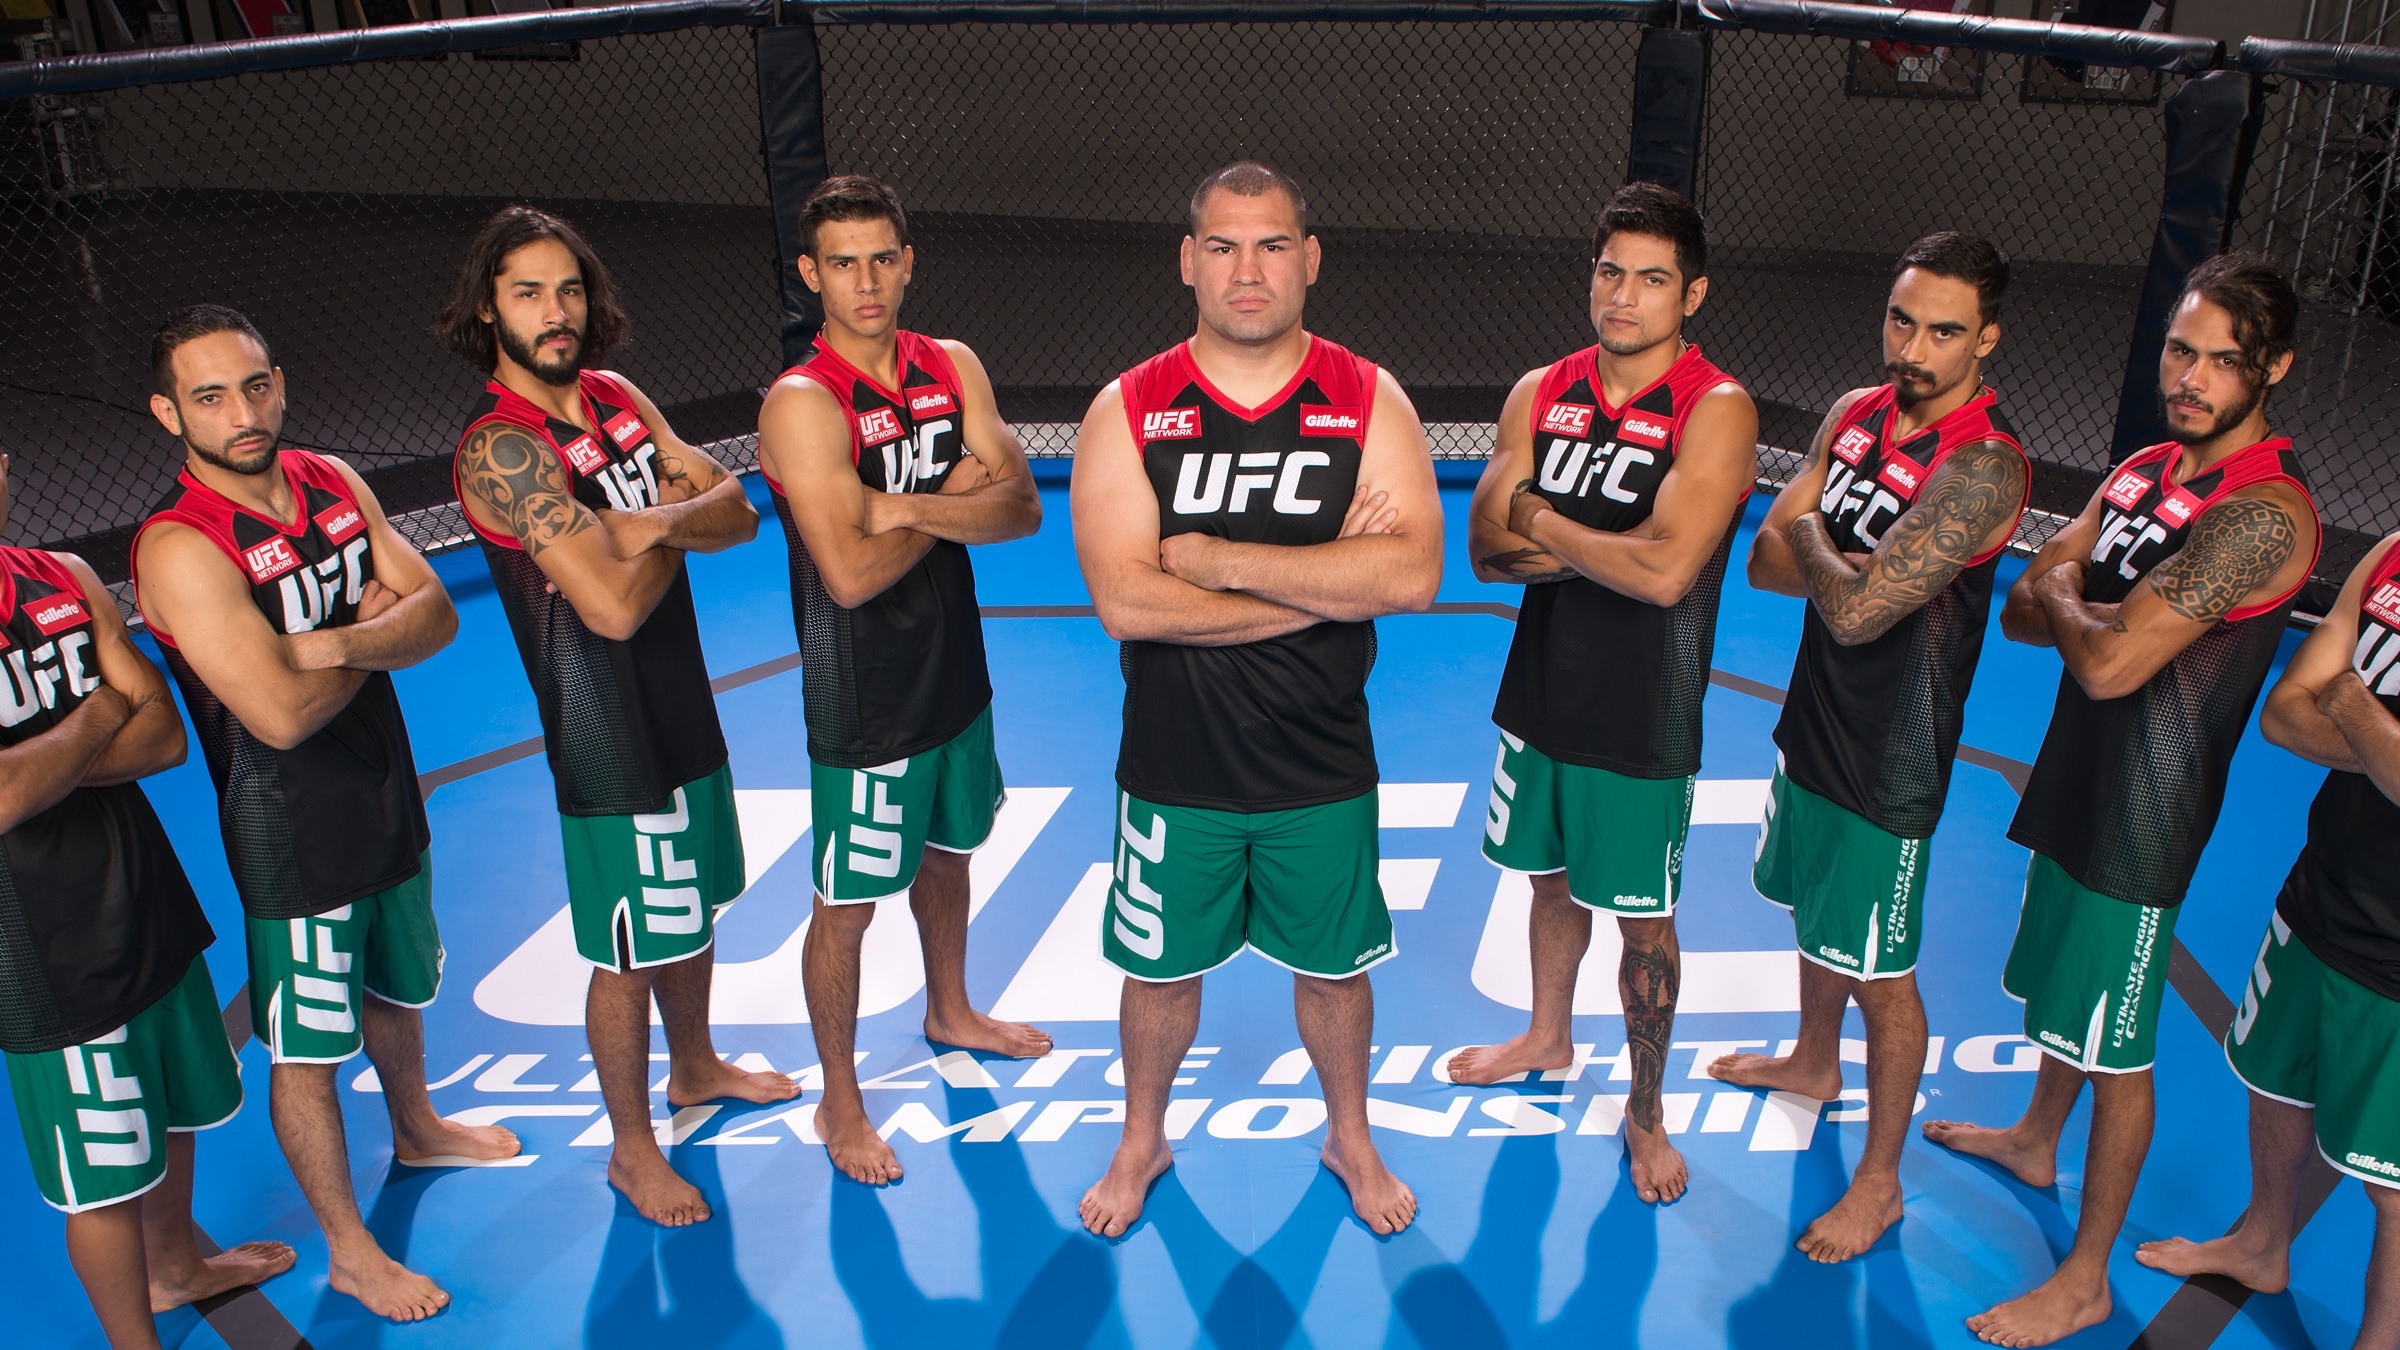 UFC news: Who should coach 'The Ultimate Fighter' reboot season?